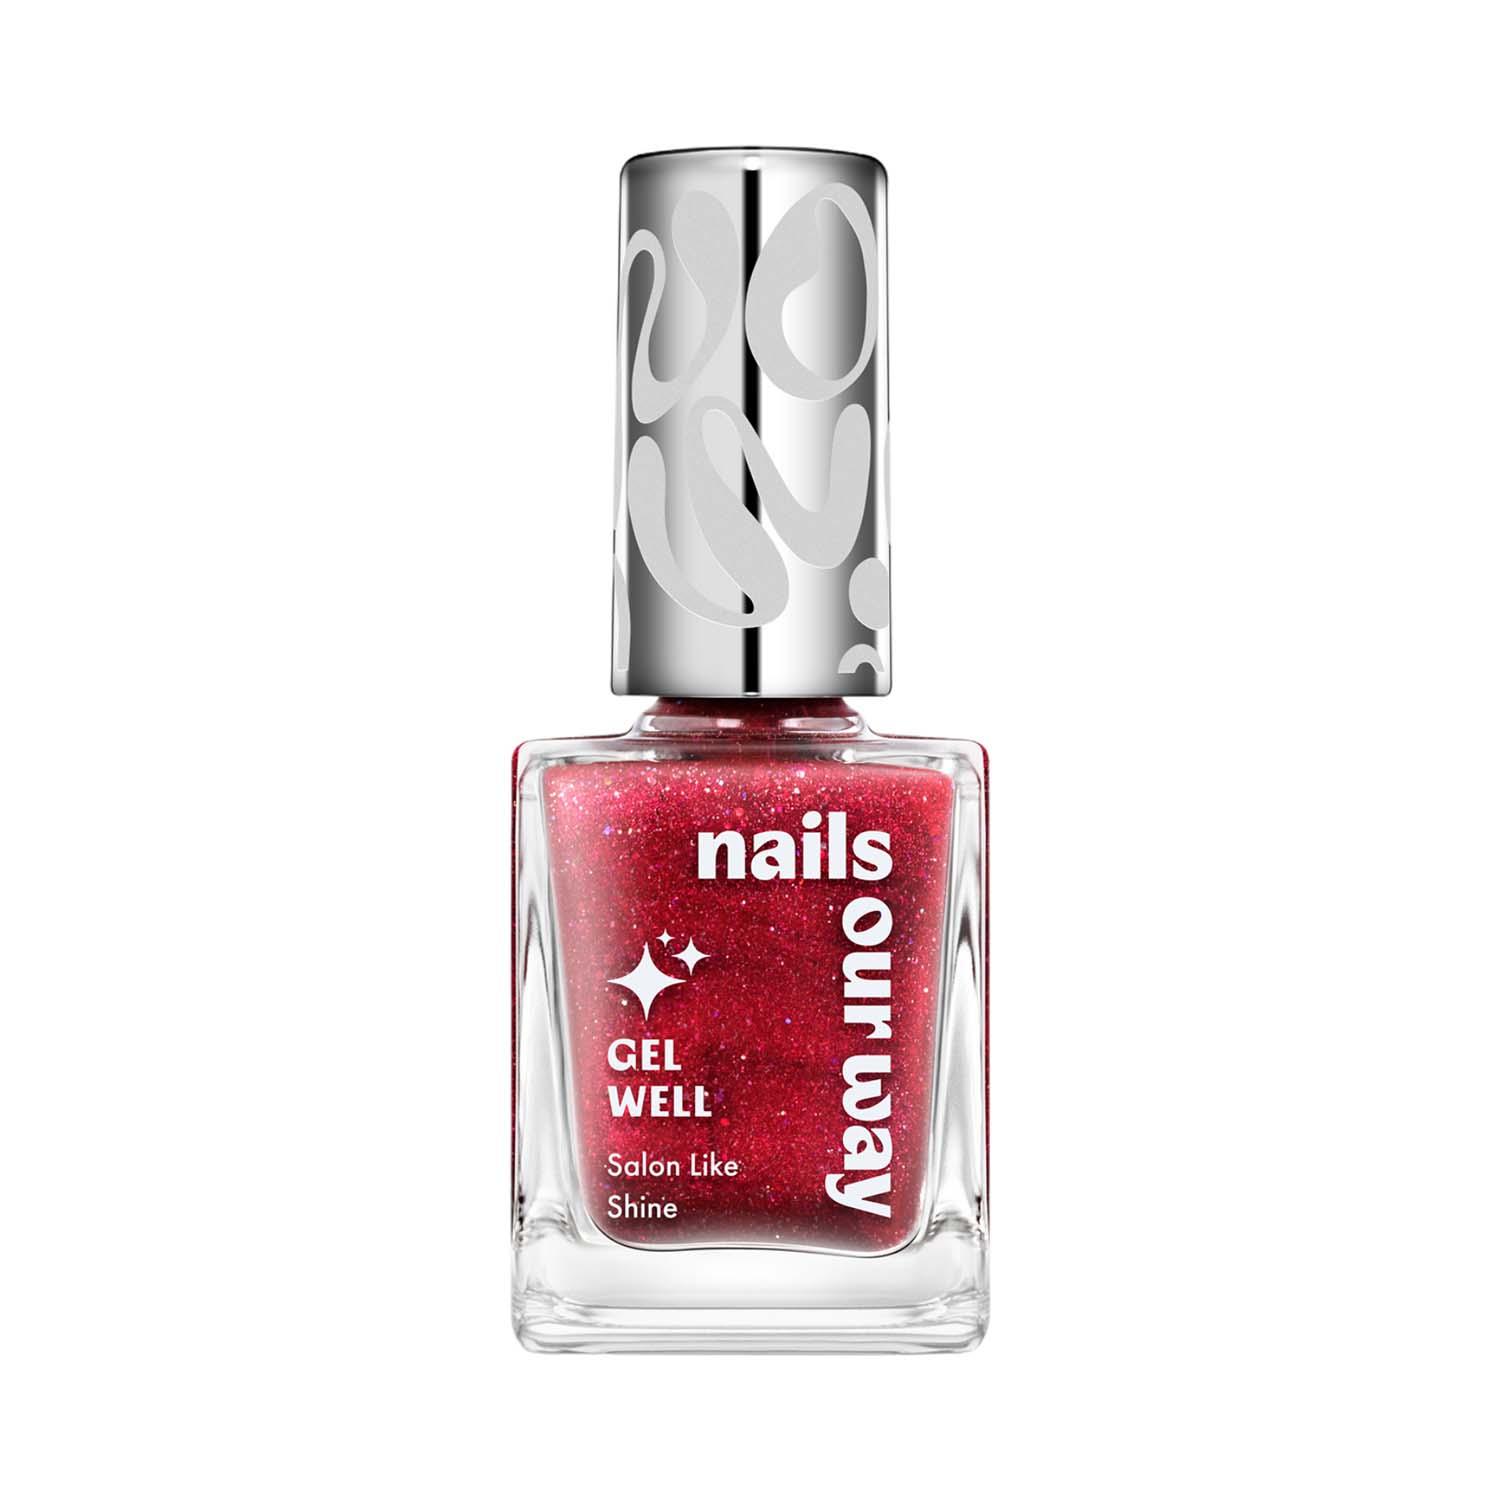 Nails Our Way | Nails Our Way Gel Well Nail Enamel - 109 Romantic (10 ml)